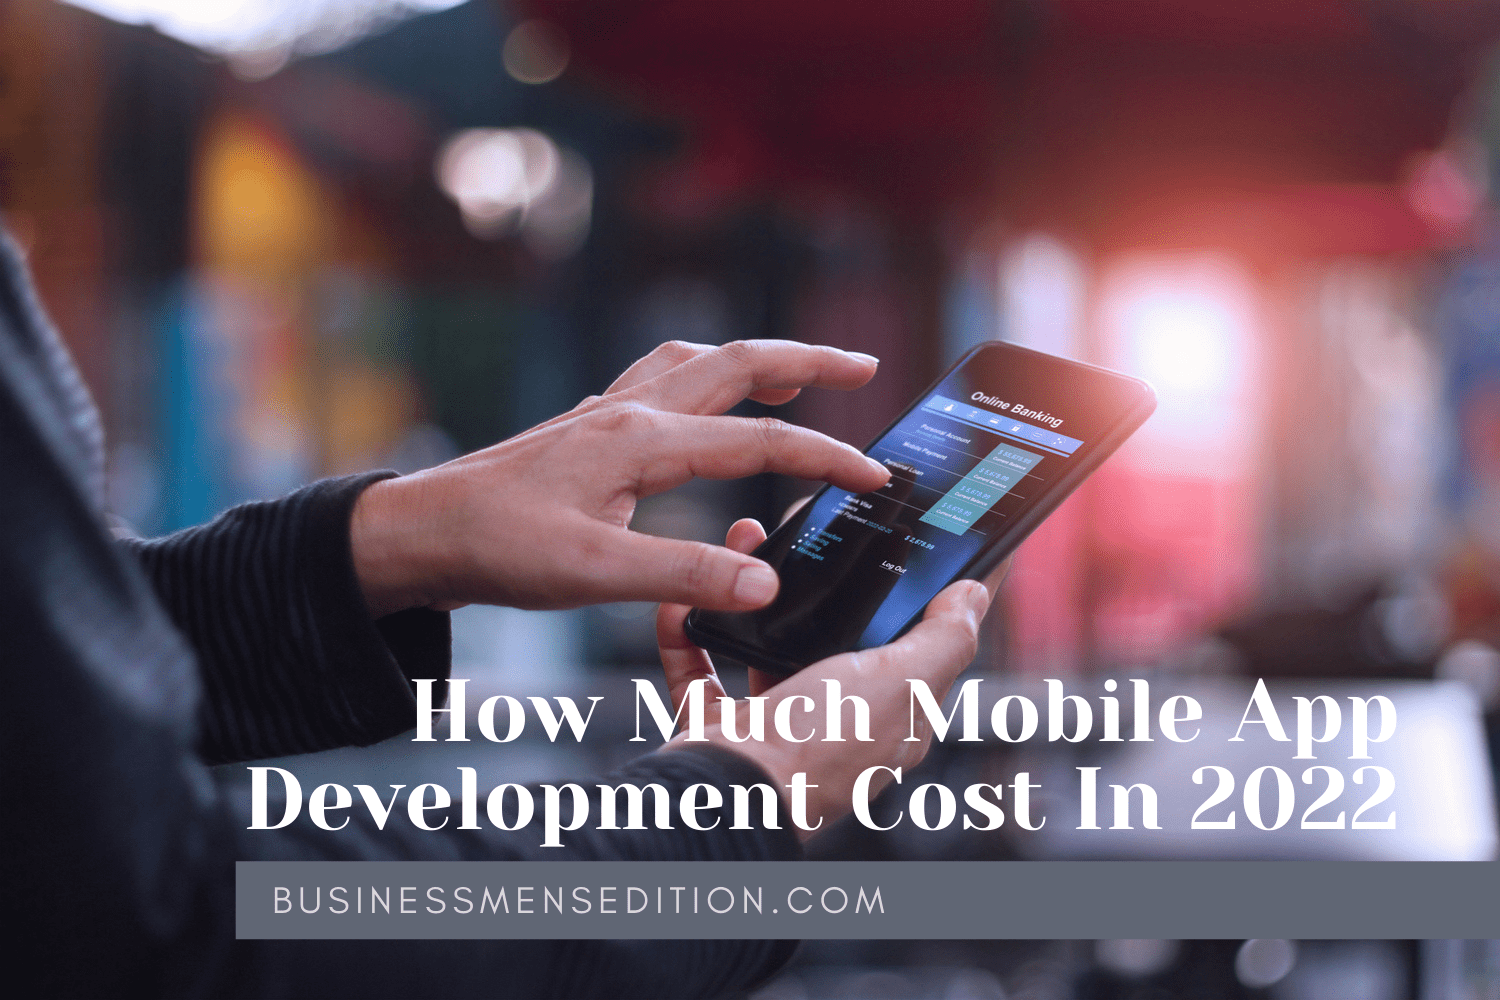 How Much Mobile App Development Cost In 2022